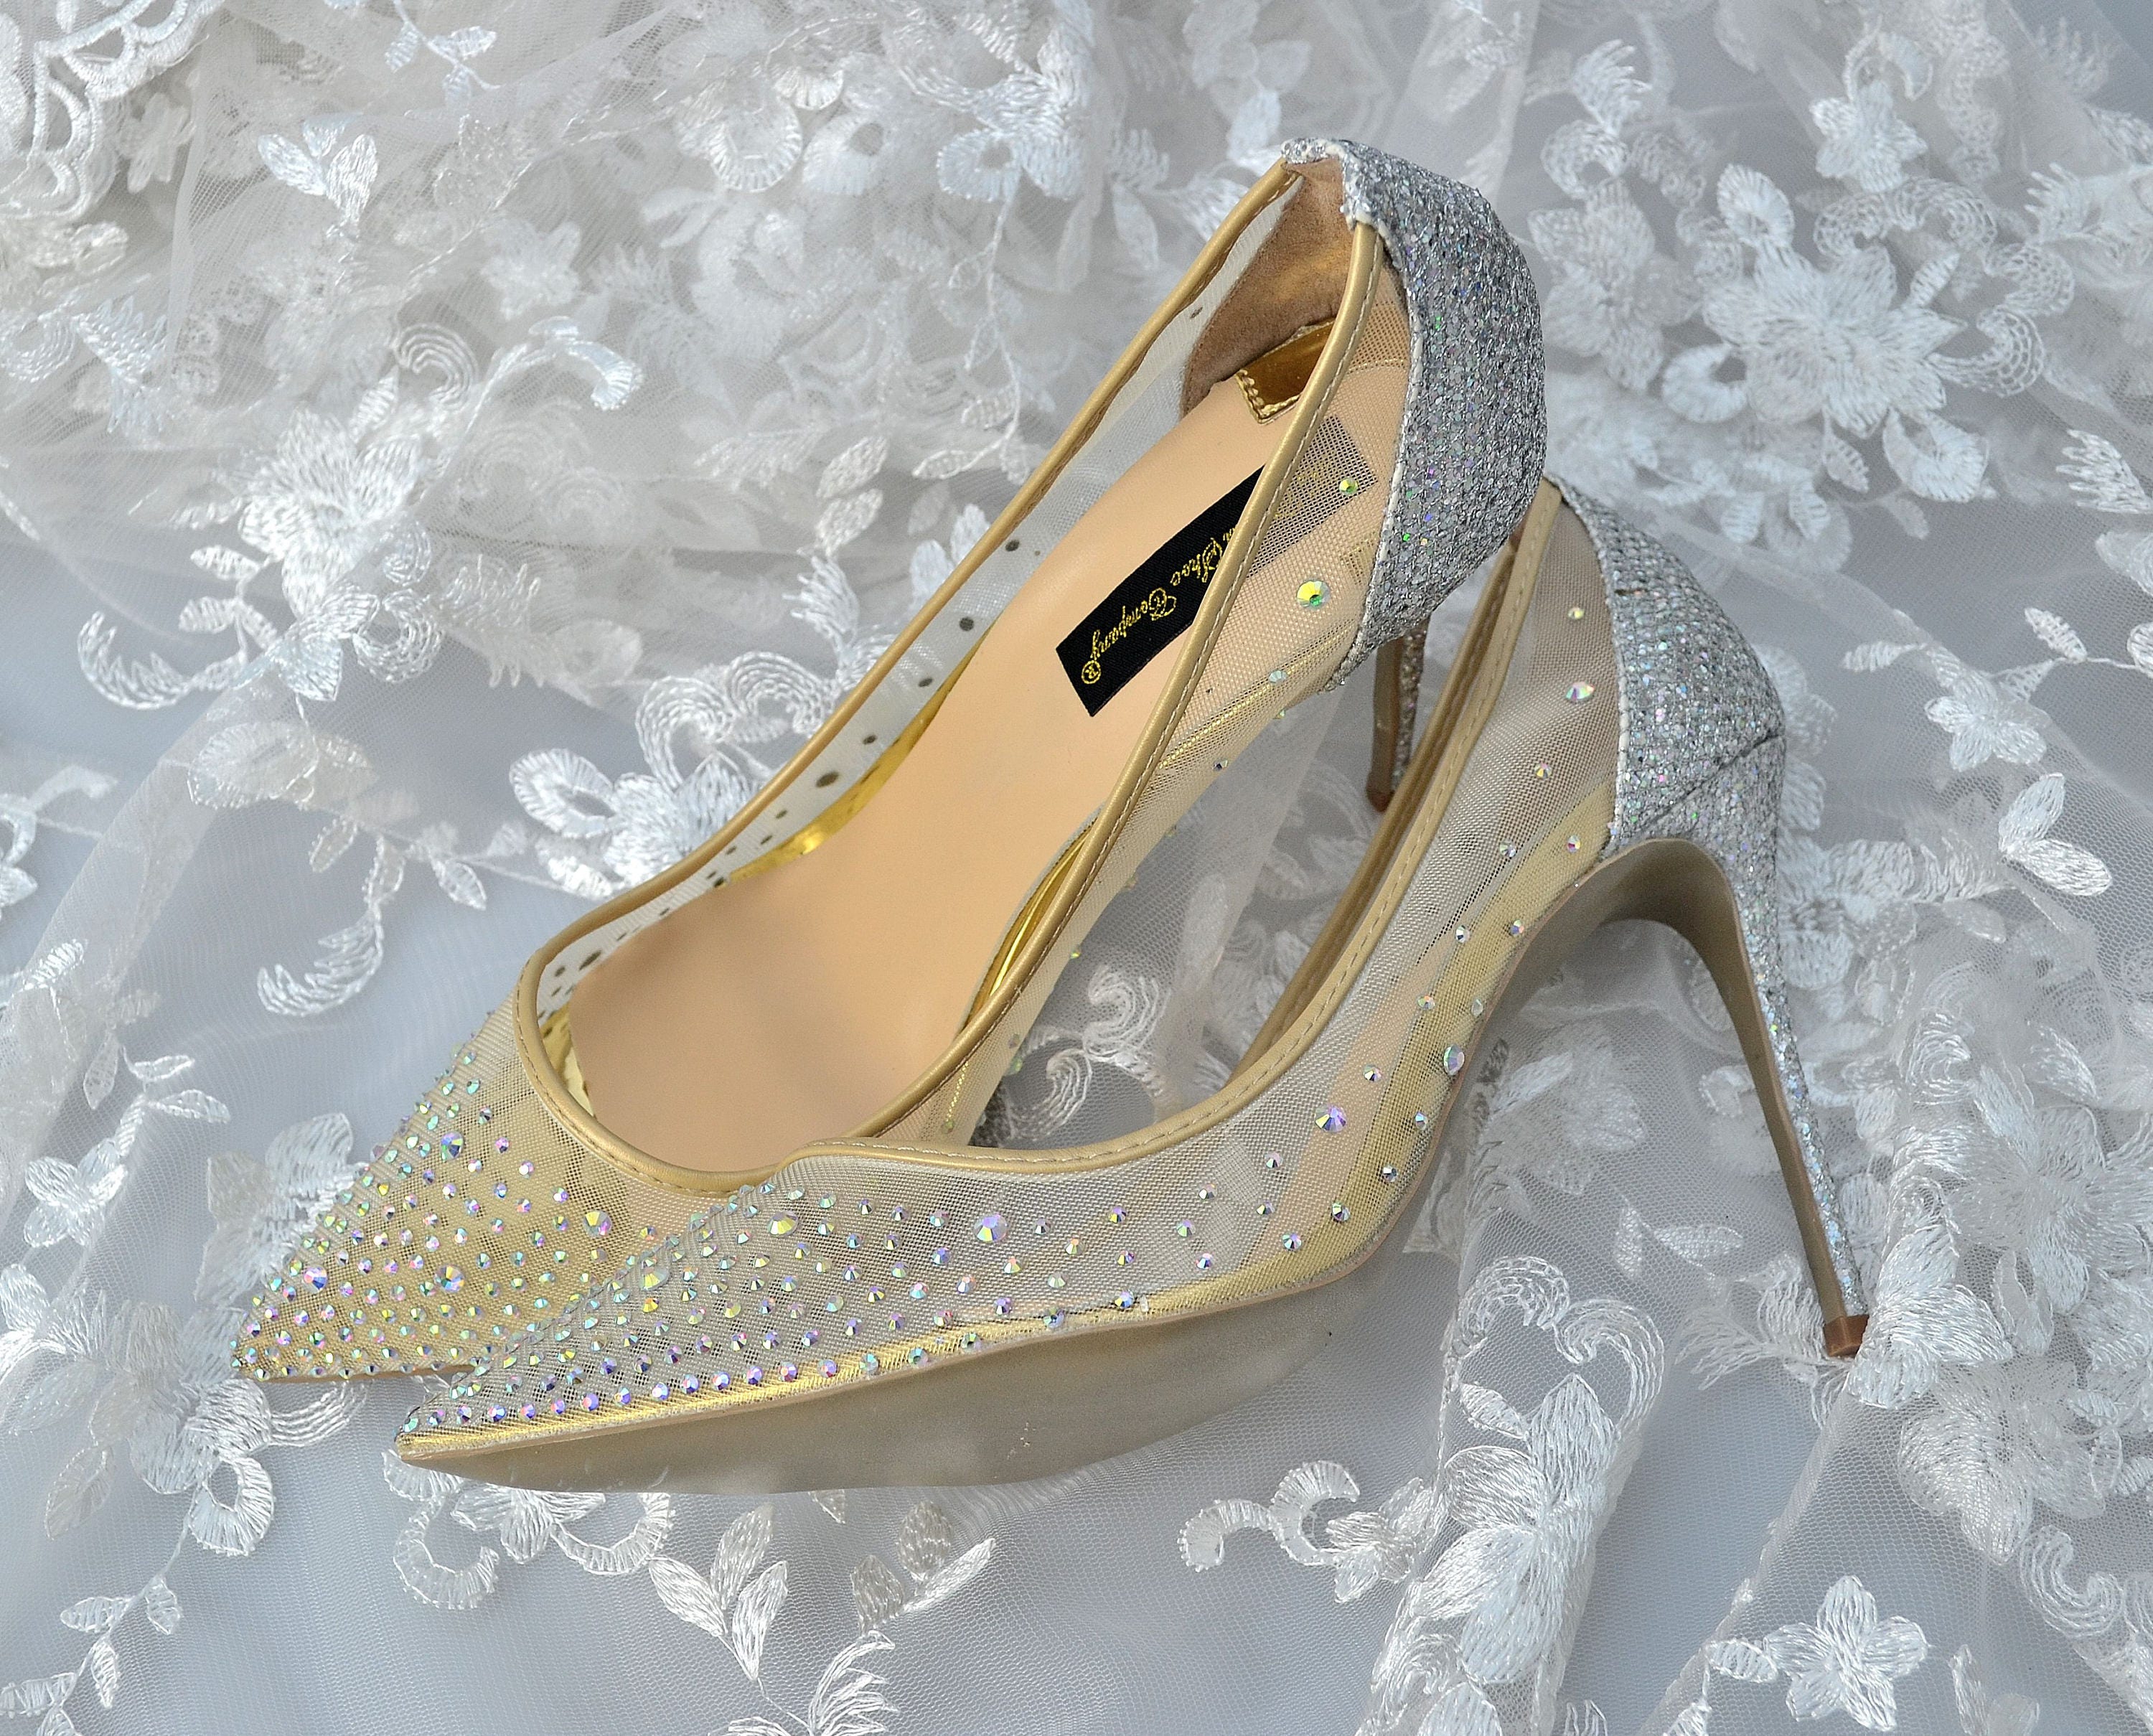 Mesh crystal pumps with snake skin heel detail – allabouttrends